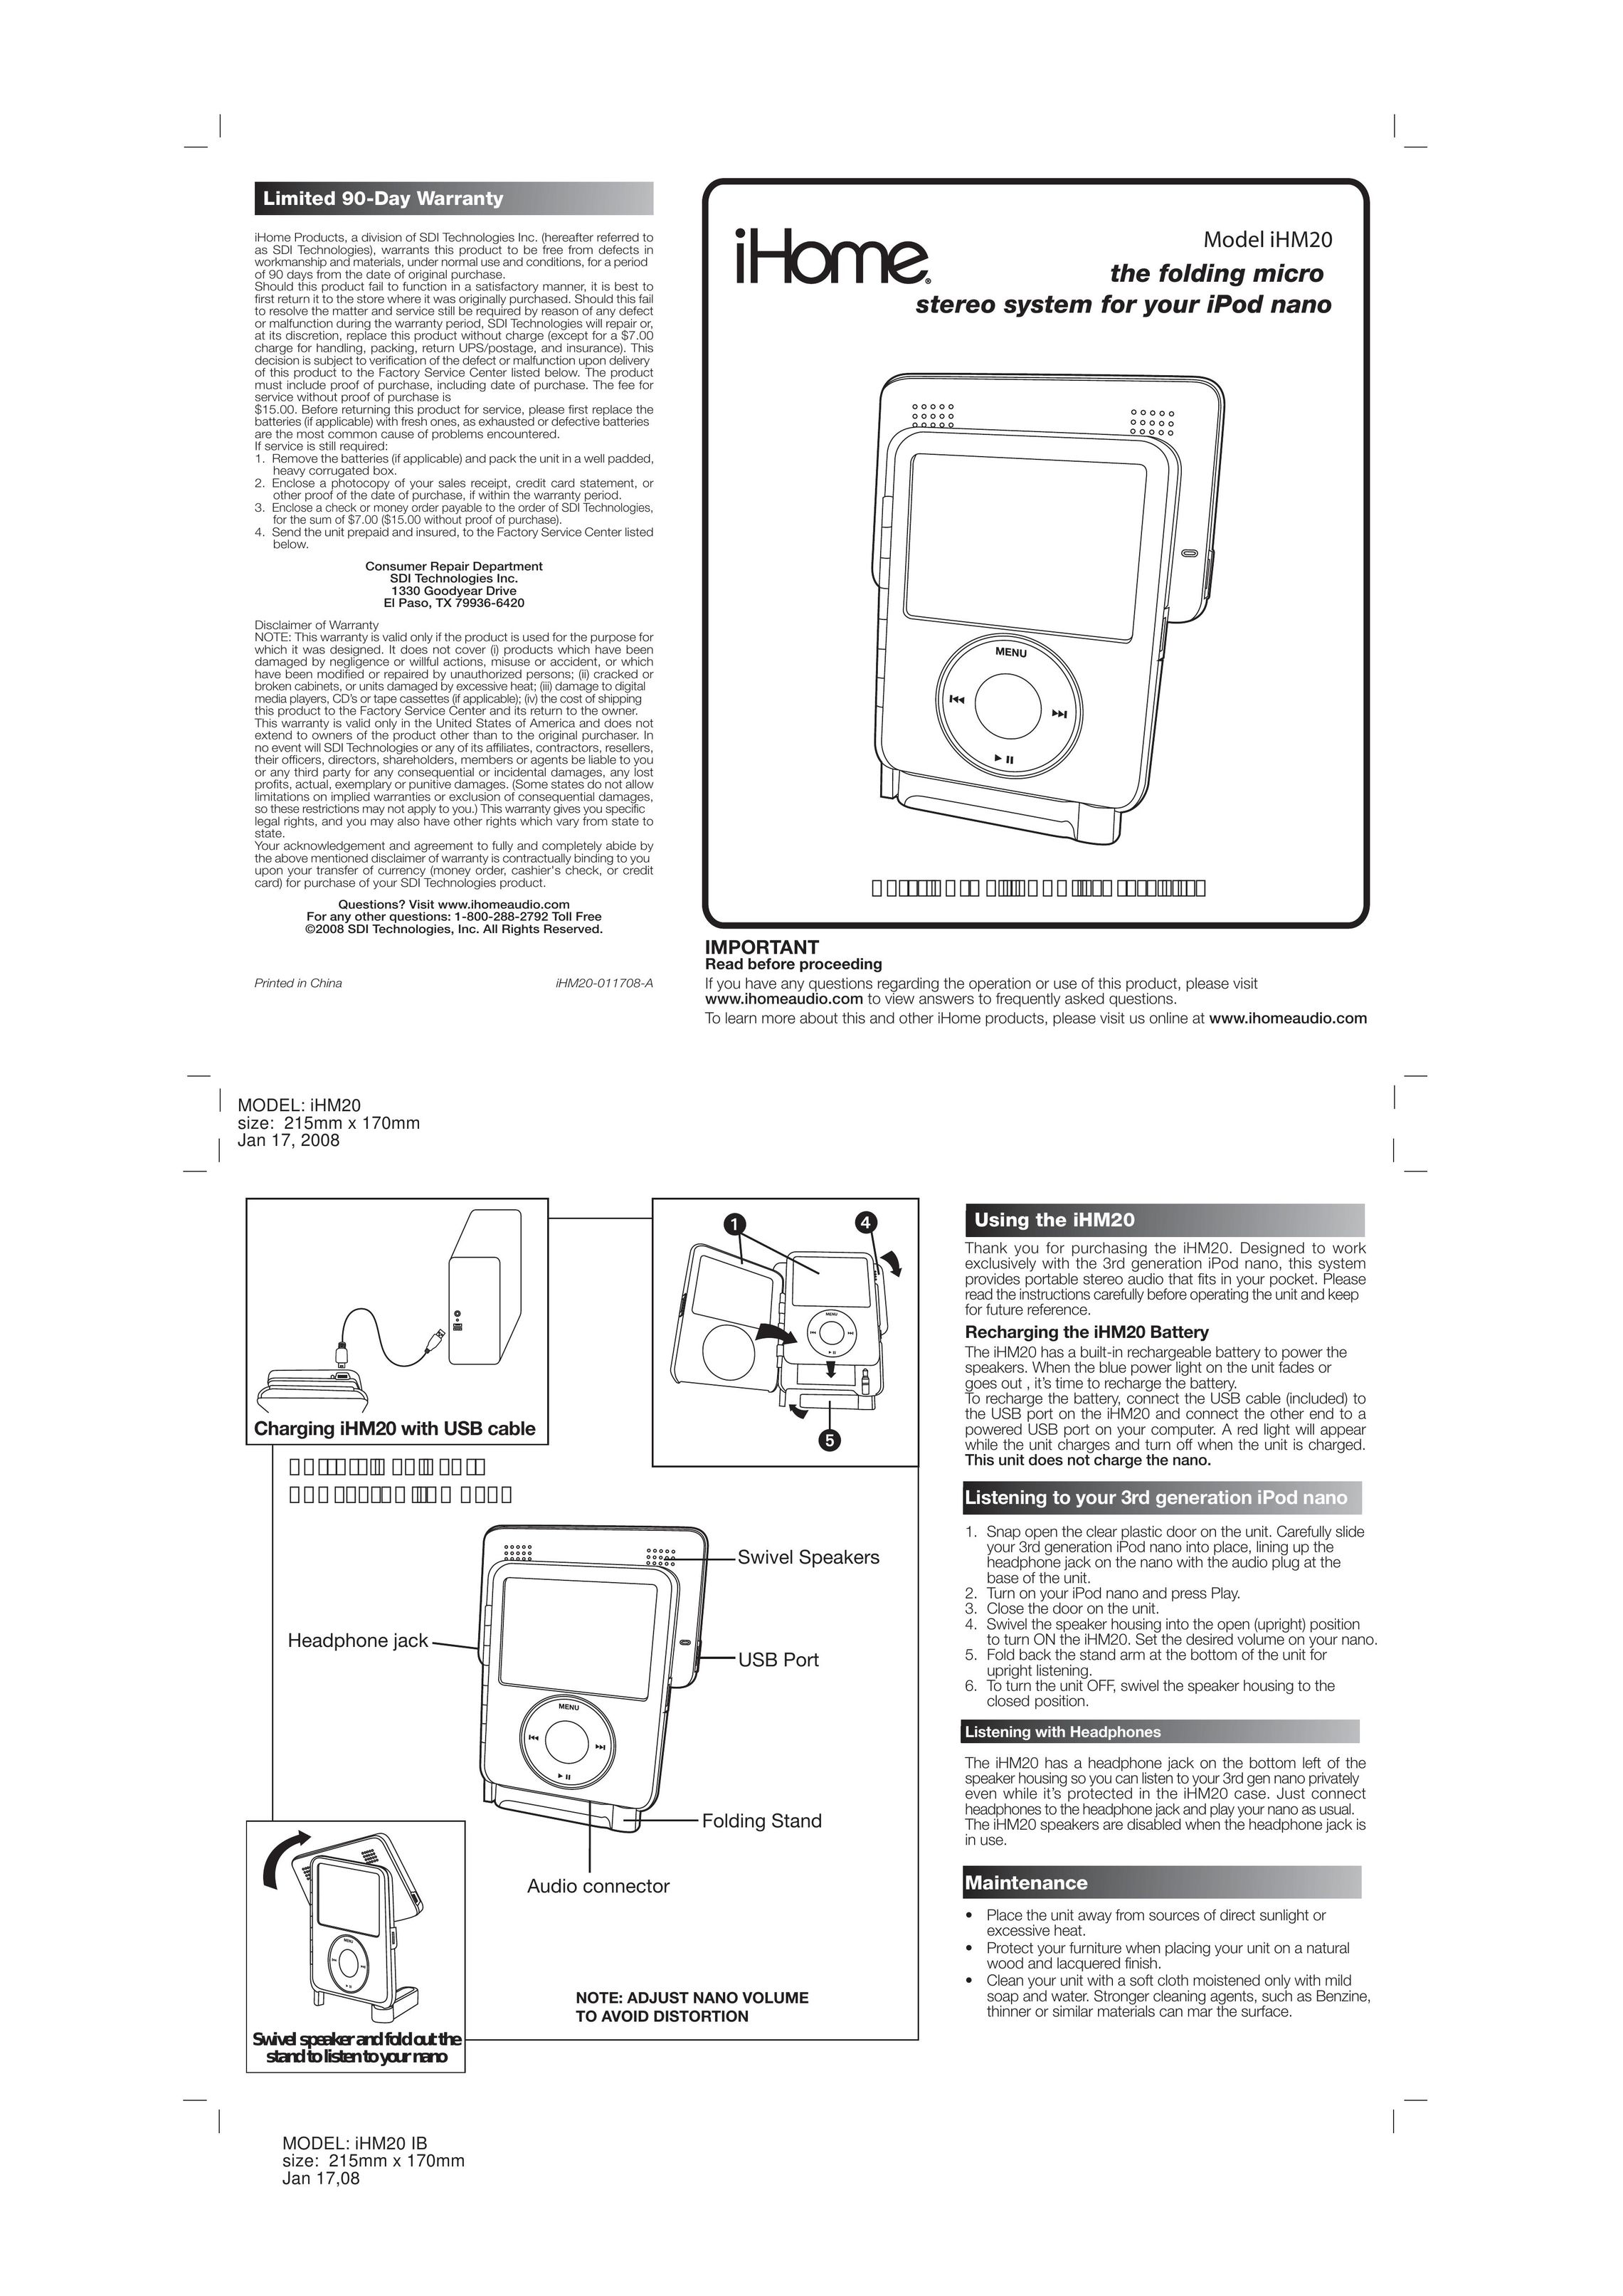 iHome IHM20 Portable Stereo System User Manual